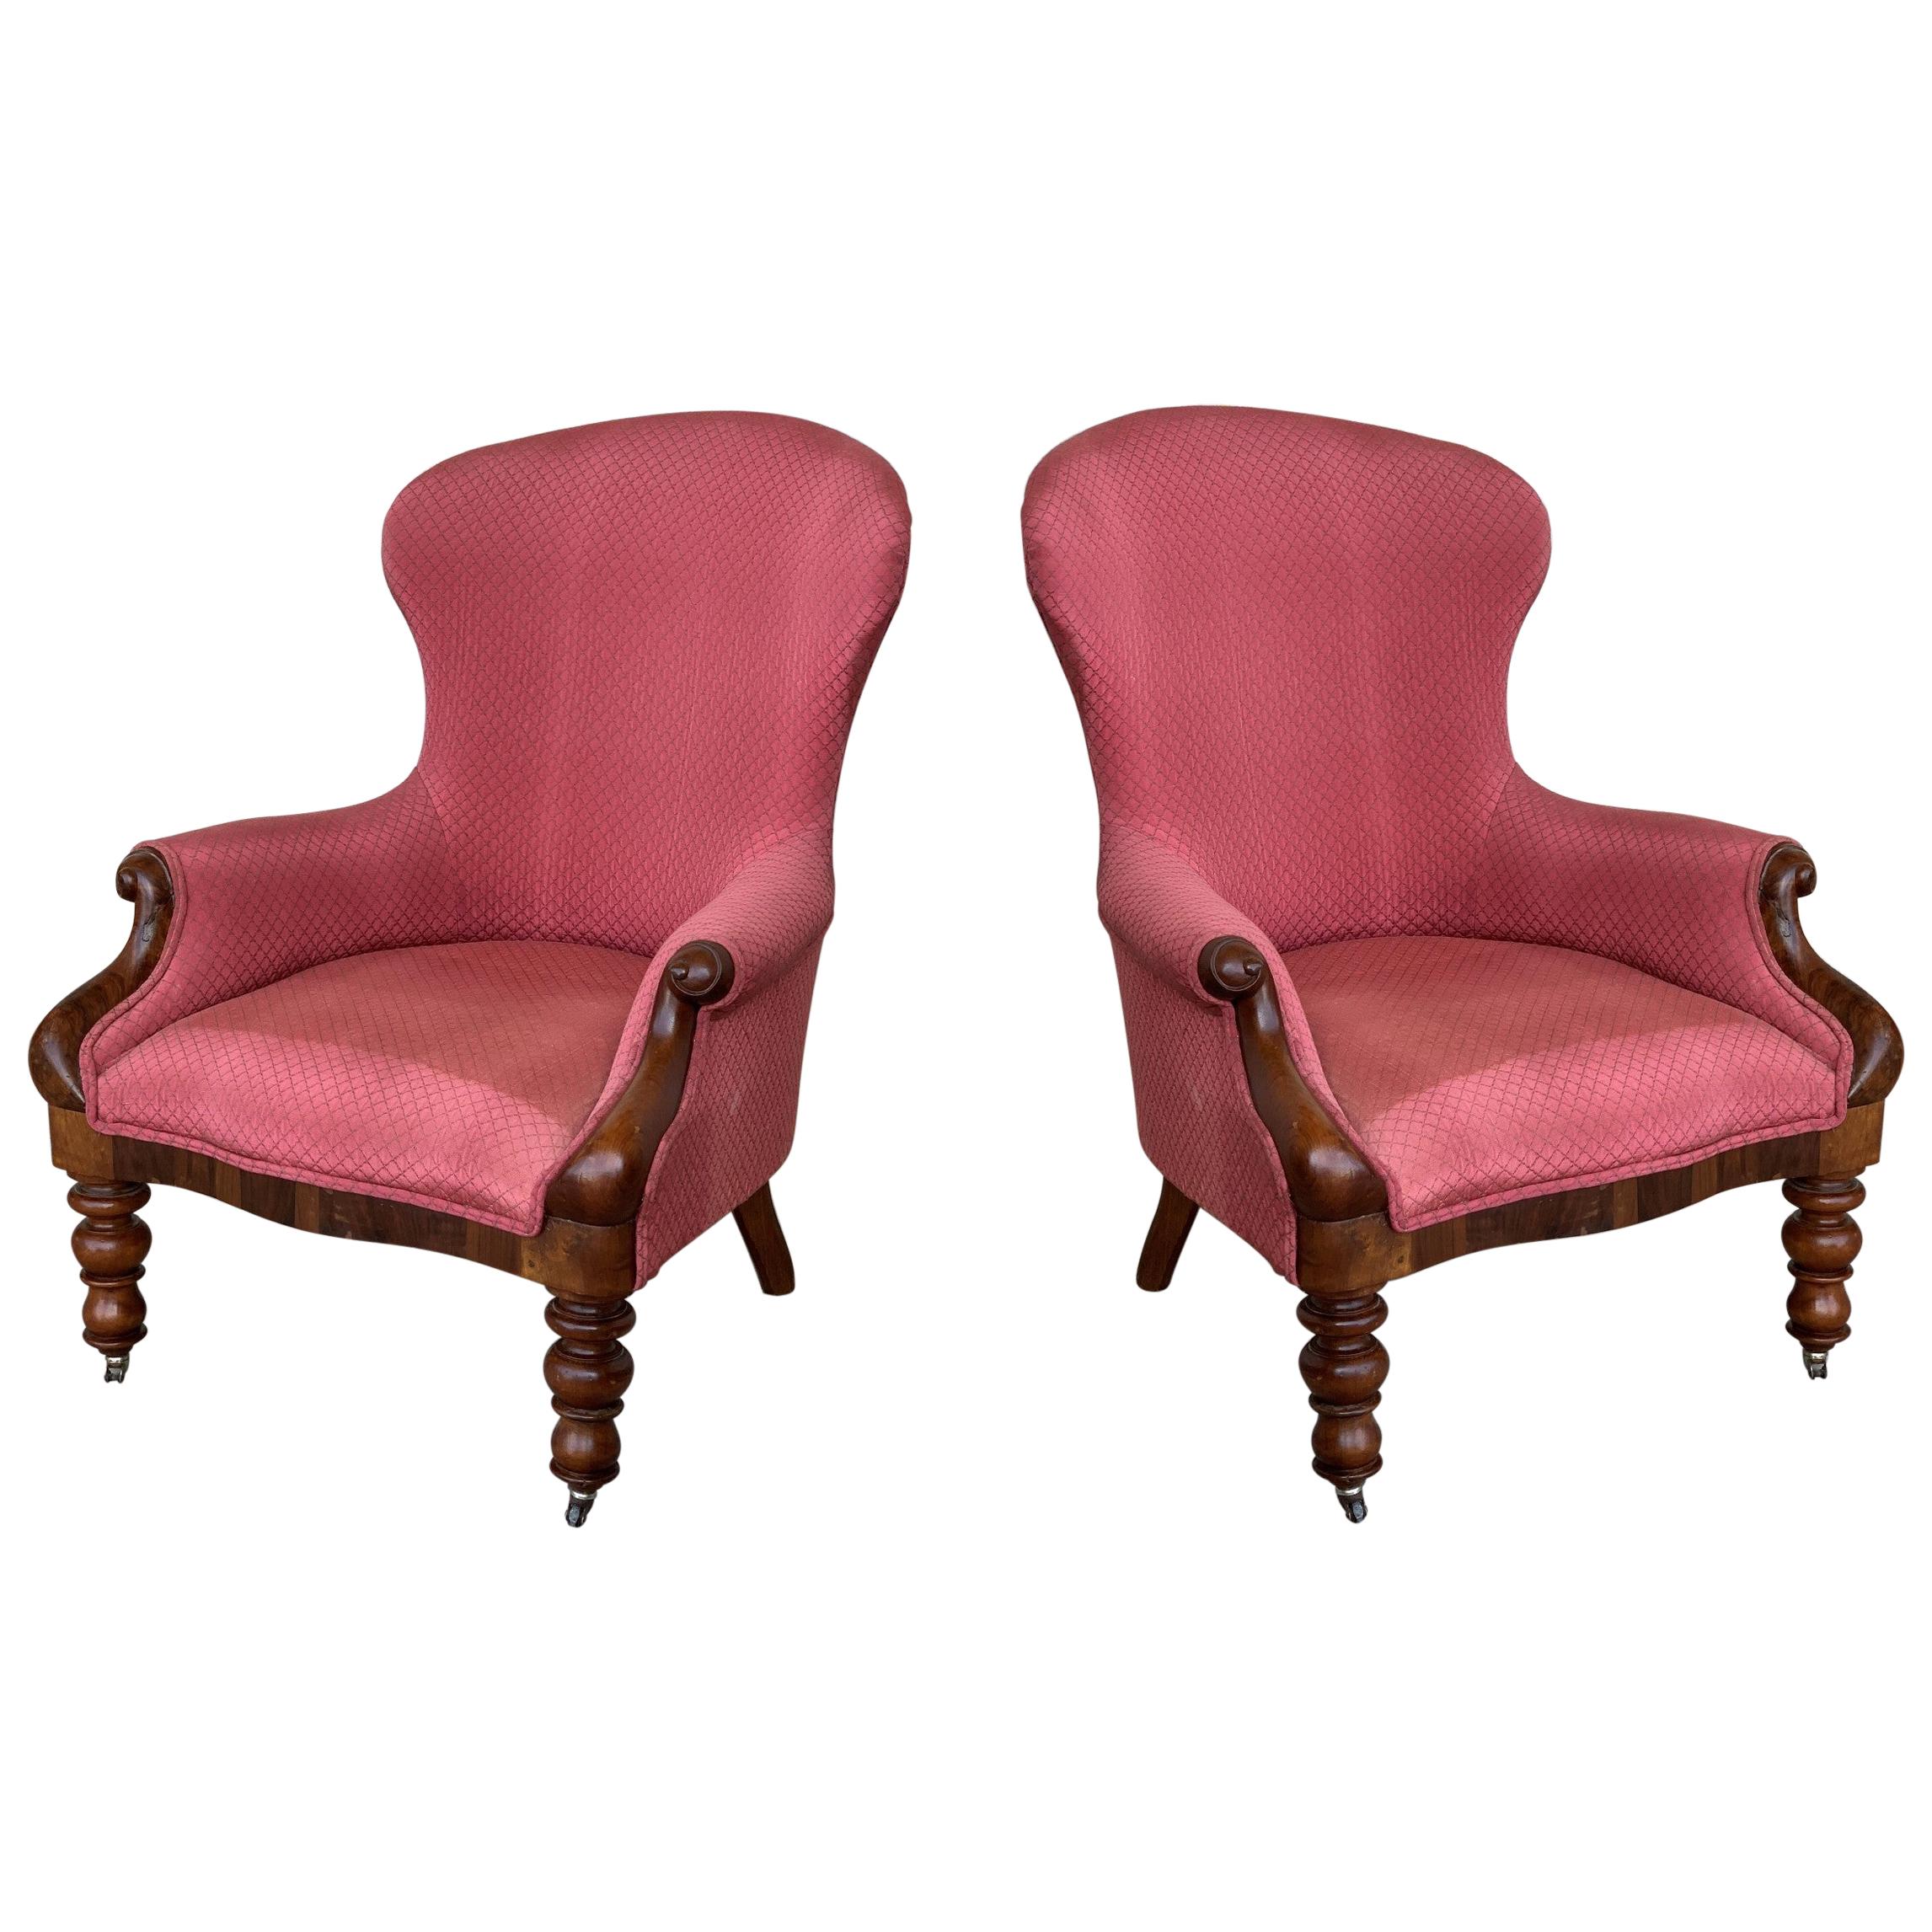 19th Century Pair of Louis XV Bergère Armchairs in Red Upholstered with Wheels